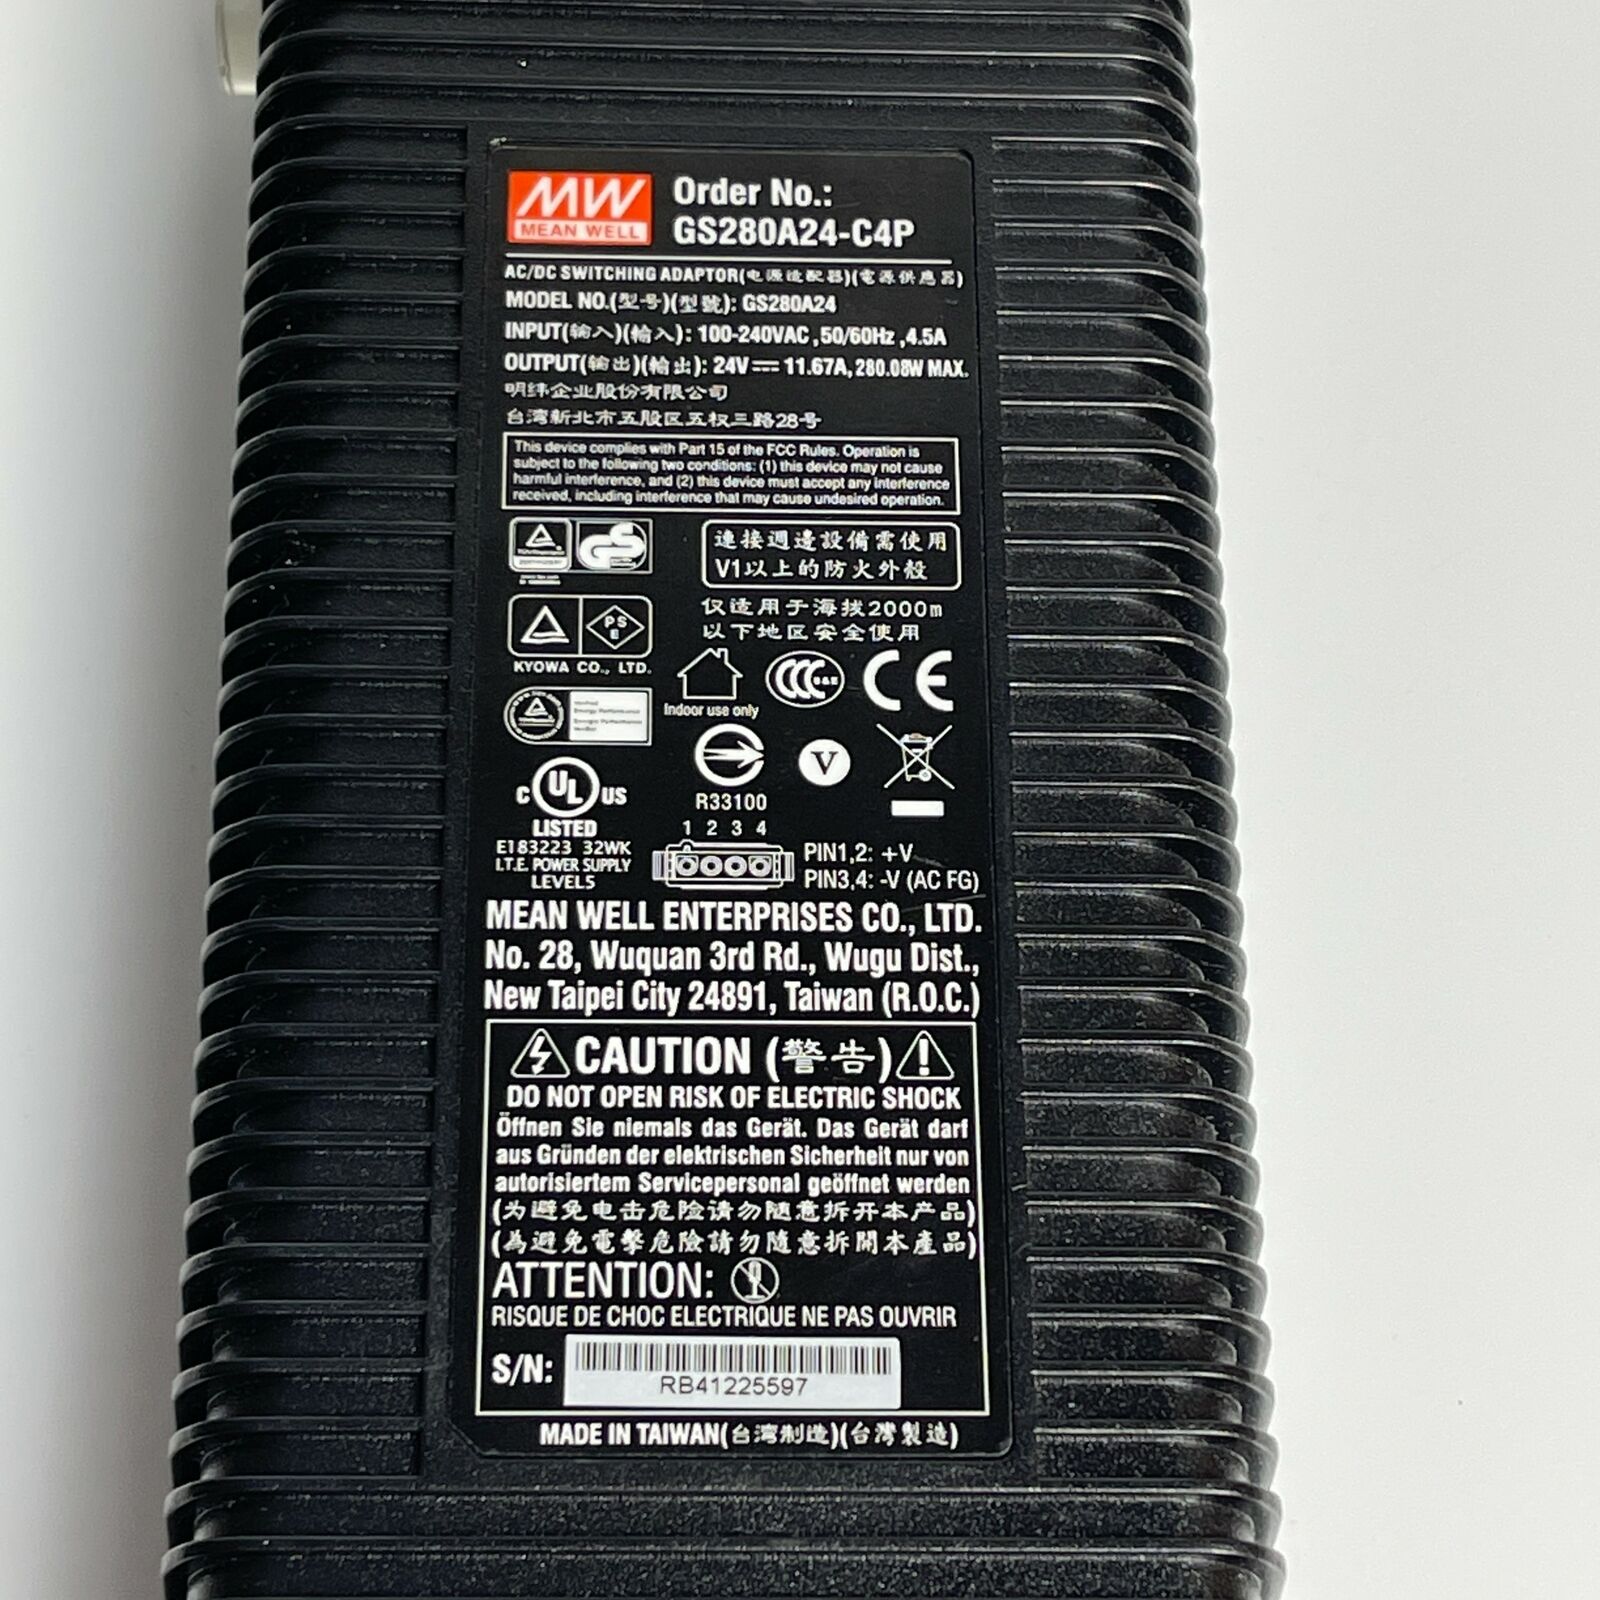 Mean Well GS280A24-C4P Black Portable 280.08W AC/DC Switching Power Adapter Brand: Mean Well MPN: GS280A24-C4P Model